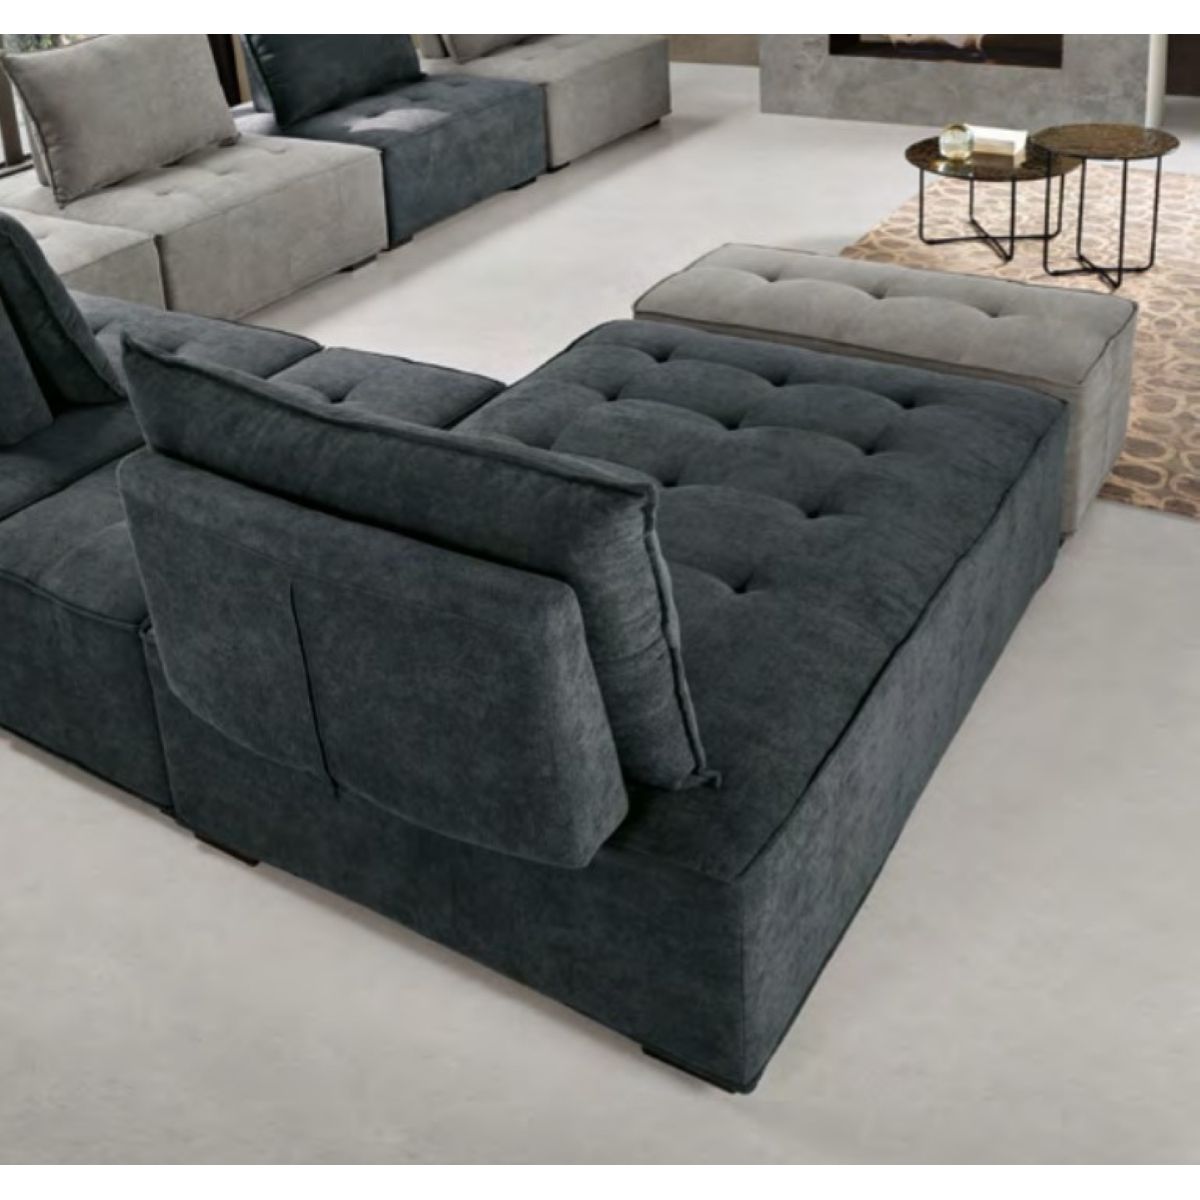 Modular Sofa 109X154 Cm Carroll With Chaise Longue In Dark Gray Fabric With Modular Couches (View 15 of 15)